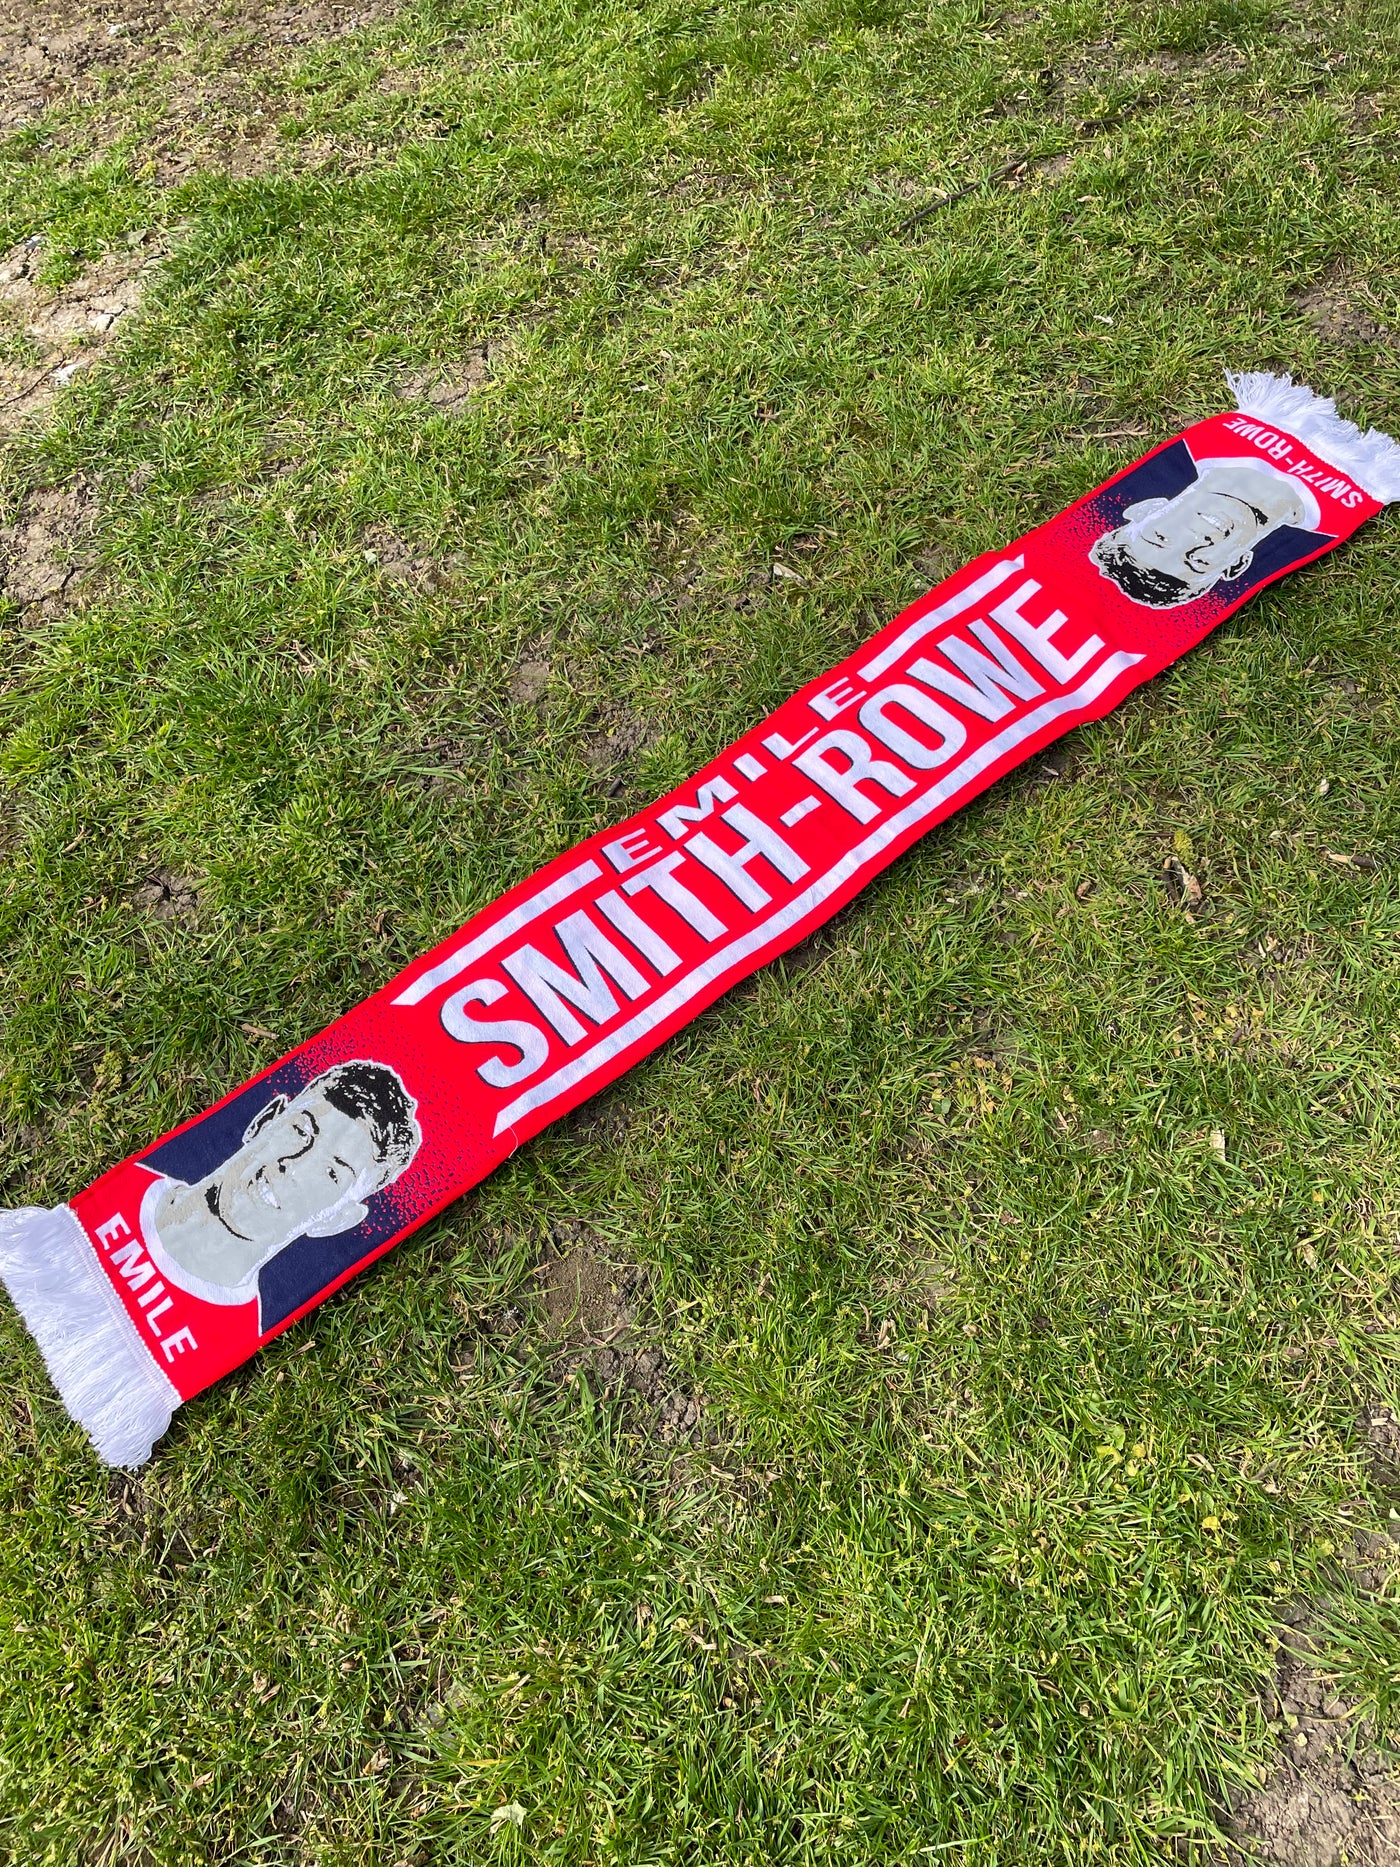 Smith -Rowe supporters scarf